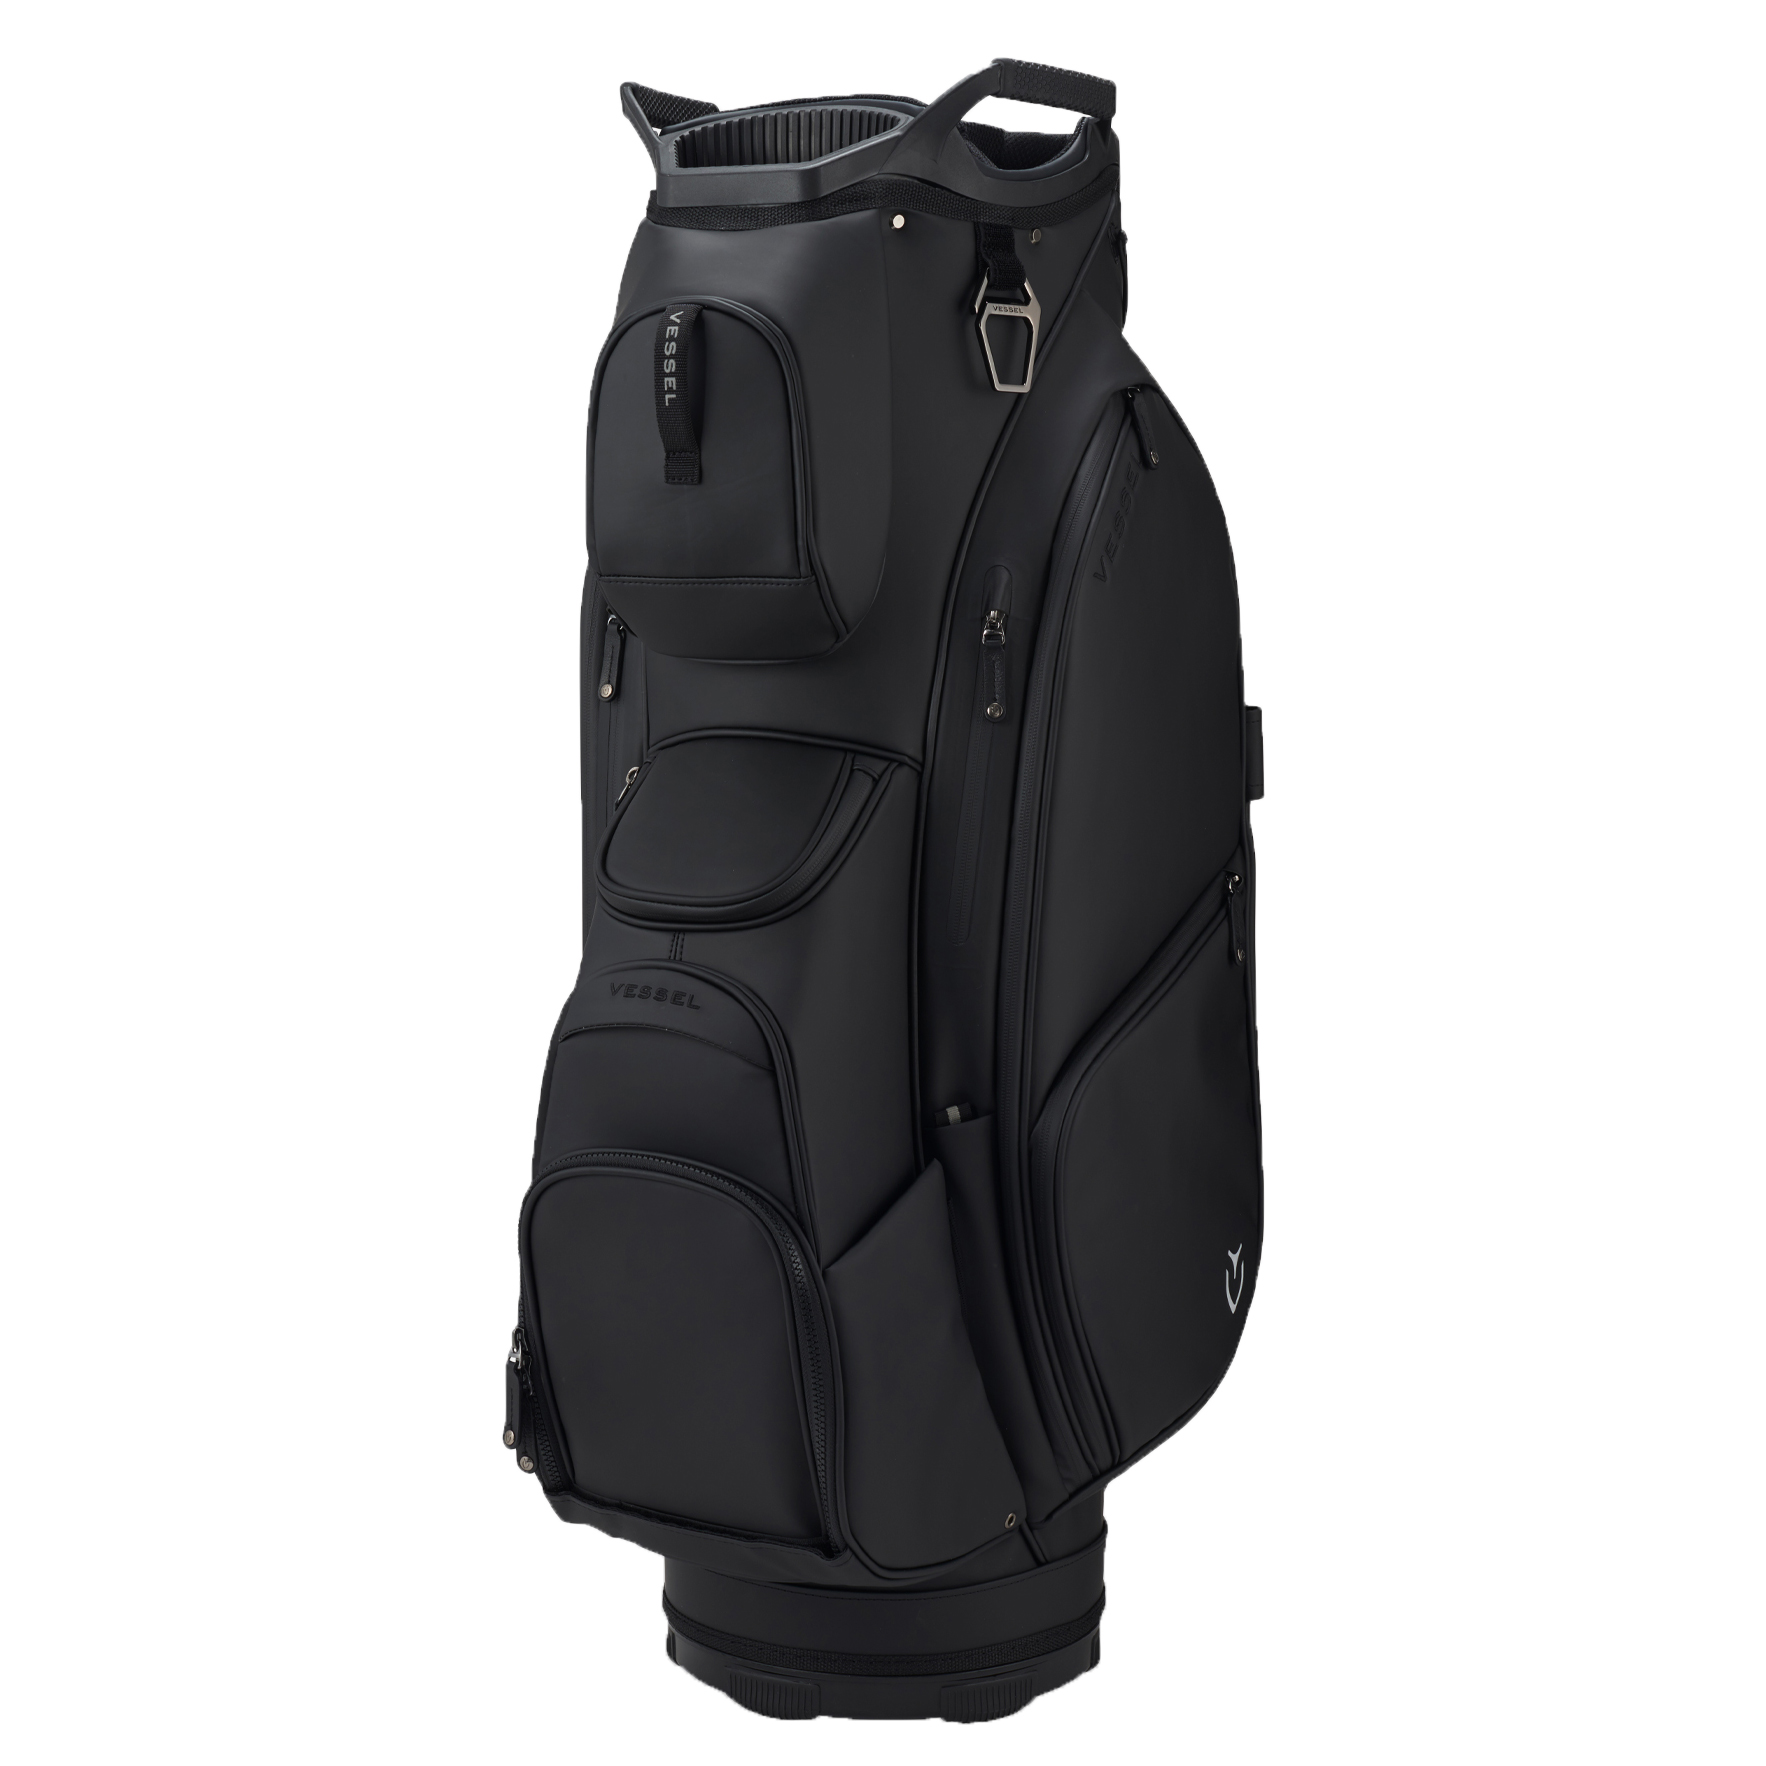 Vessel 2022 Lux XV Cart Golf Bag for Sale in Moreno Valley, CA